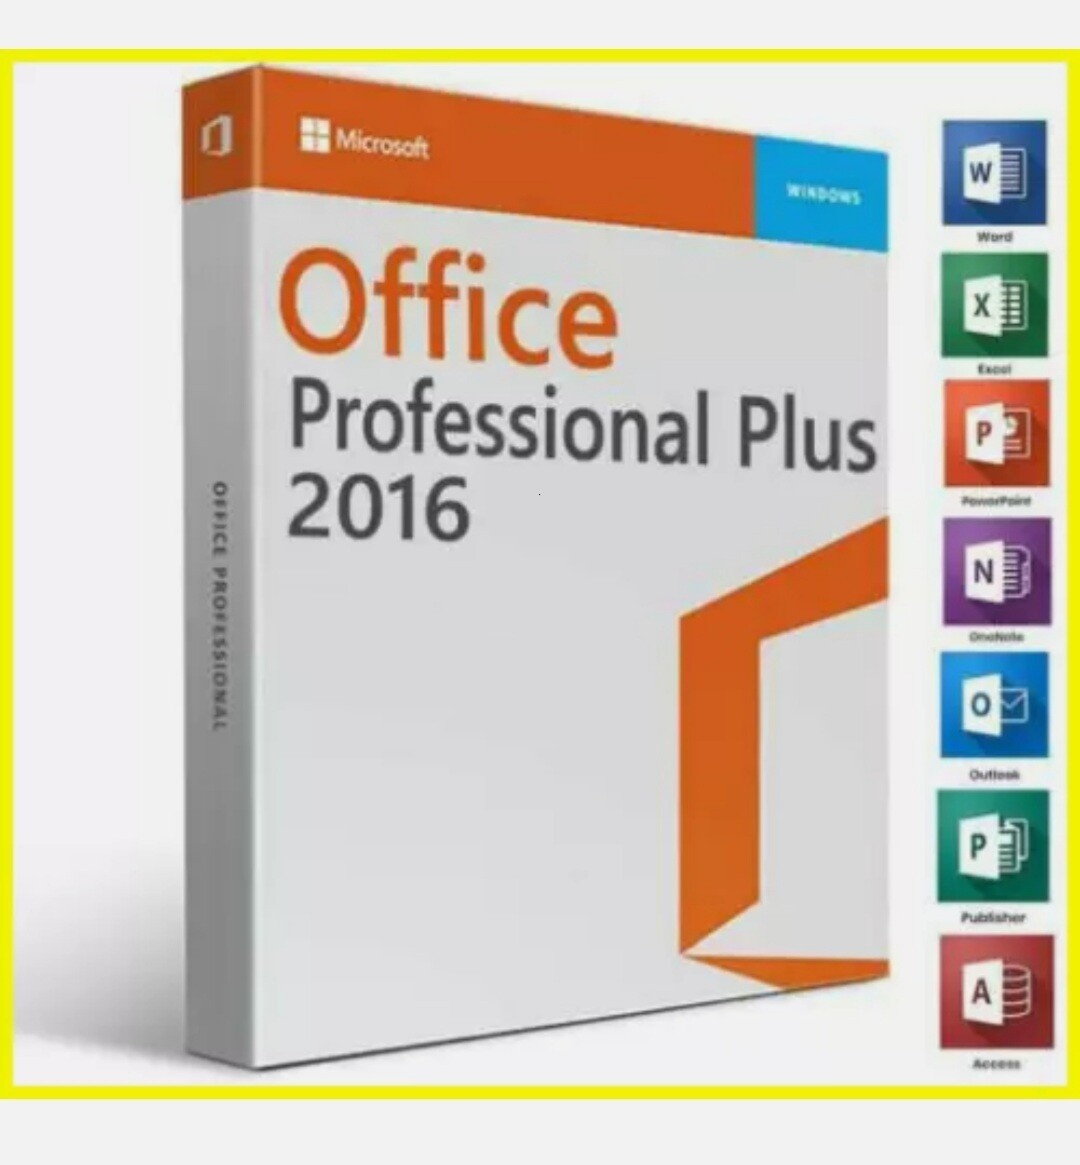 Microsoft Office 2016 Pro Plus Download and Key
32/64 Bit License